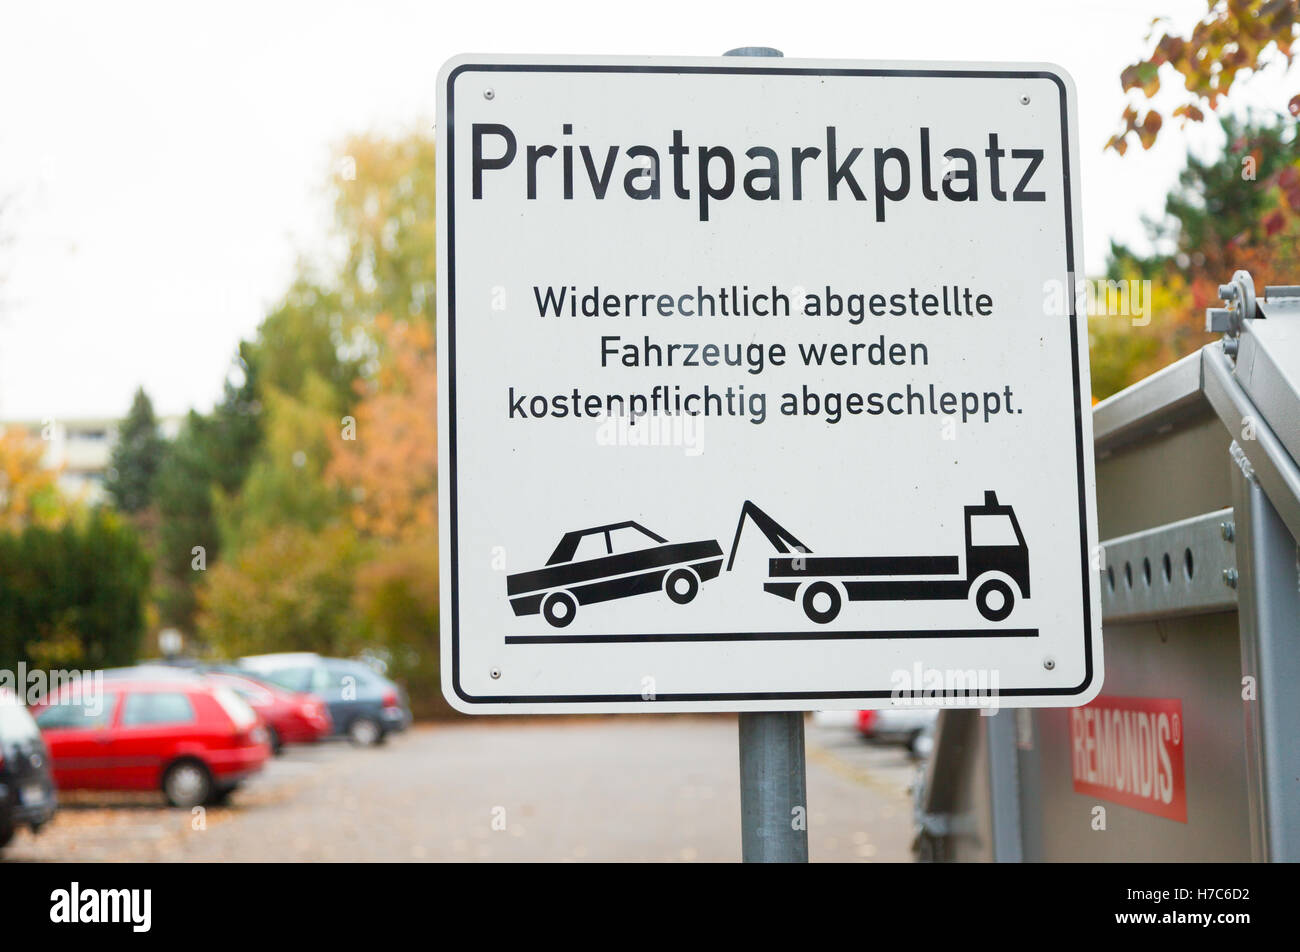 HANNOVER / GERMANY - OCTOBER 30, 2016: private parking lot sign (german: Privatparkplatz) German Text means: Unlawfully parked v Stock Photo